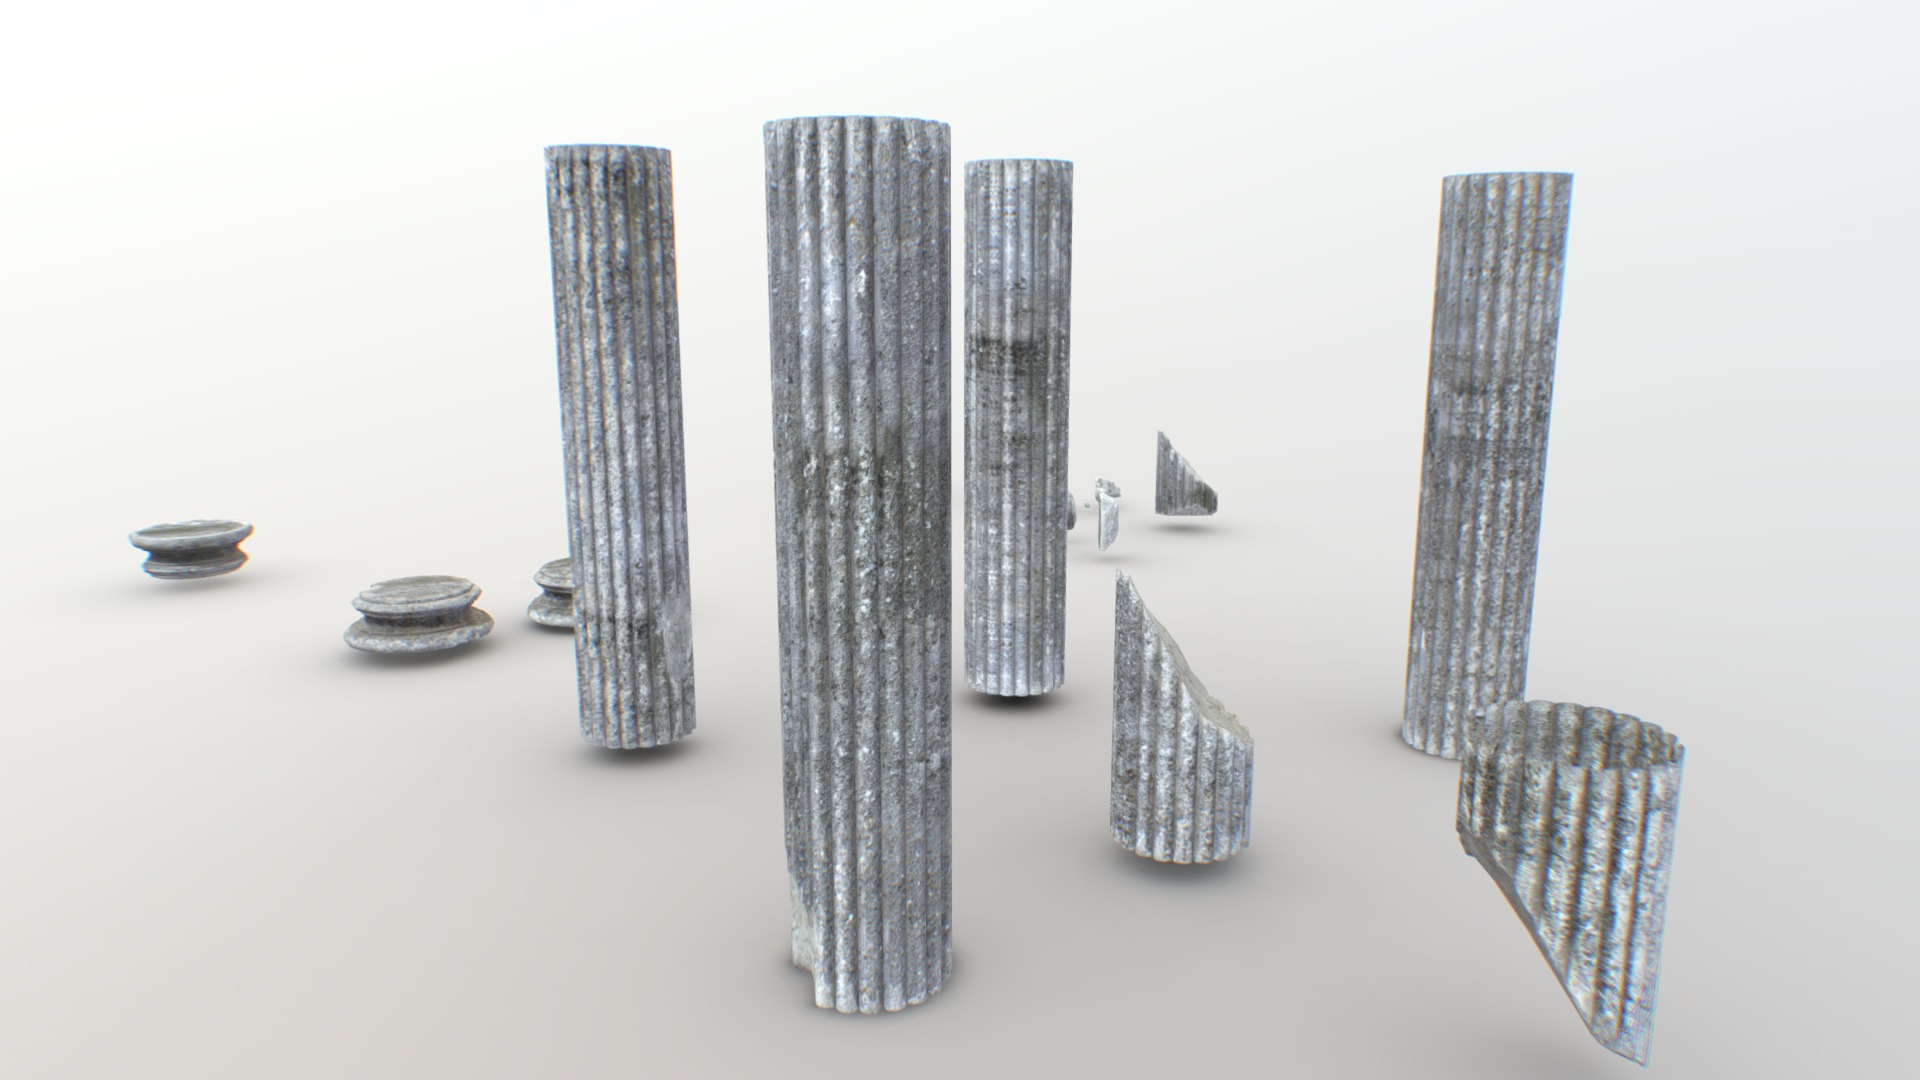 3D model Old Columns Modular PBR - This is a 3D model of the Old Columns Modular PBR. The 3D model is about several metal rods with different colored circles.